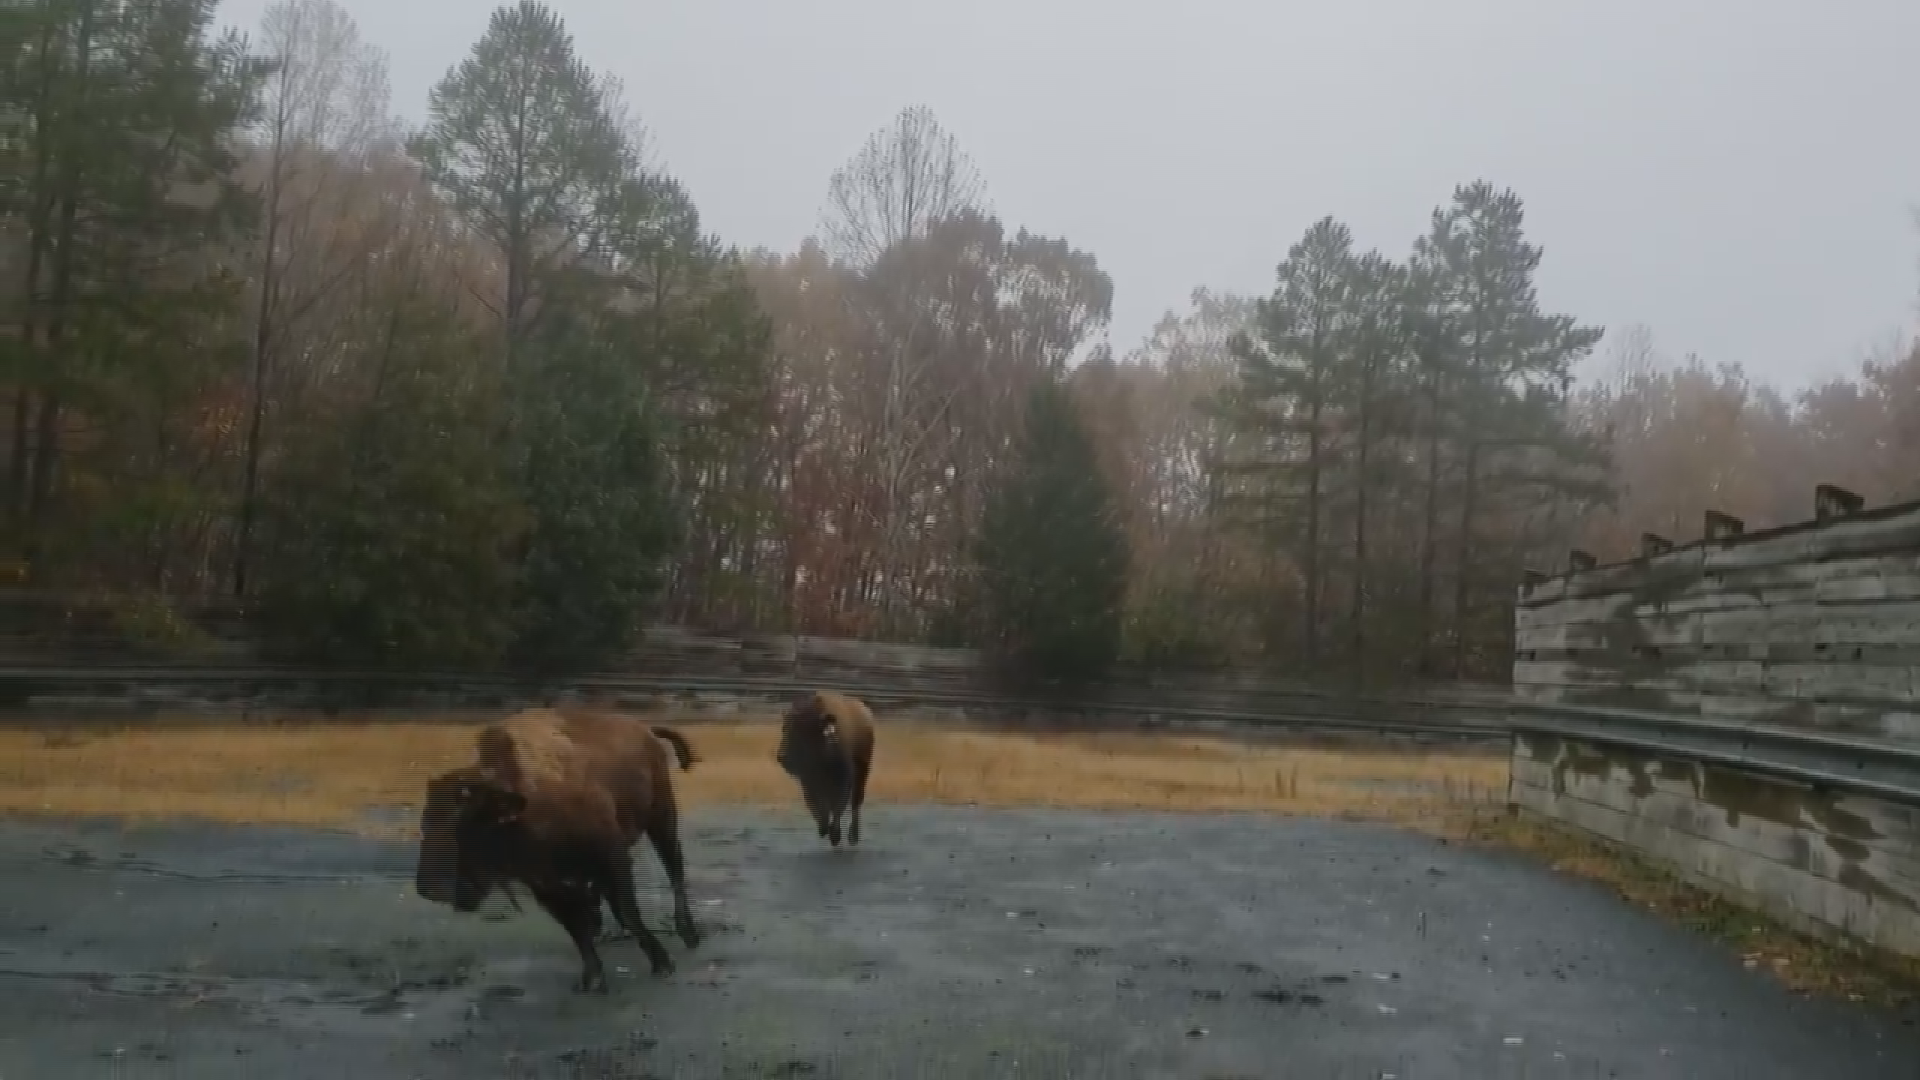 Bison girls, Wiley and Annie, are loving the rain! The NC Zoo says the pair came to the zoo in November from a conservation center in Ohio.